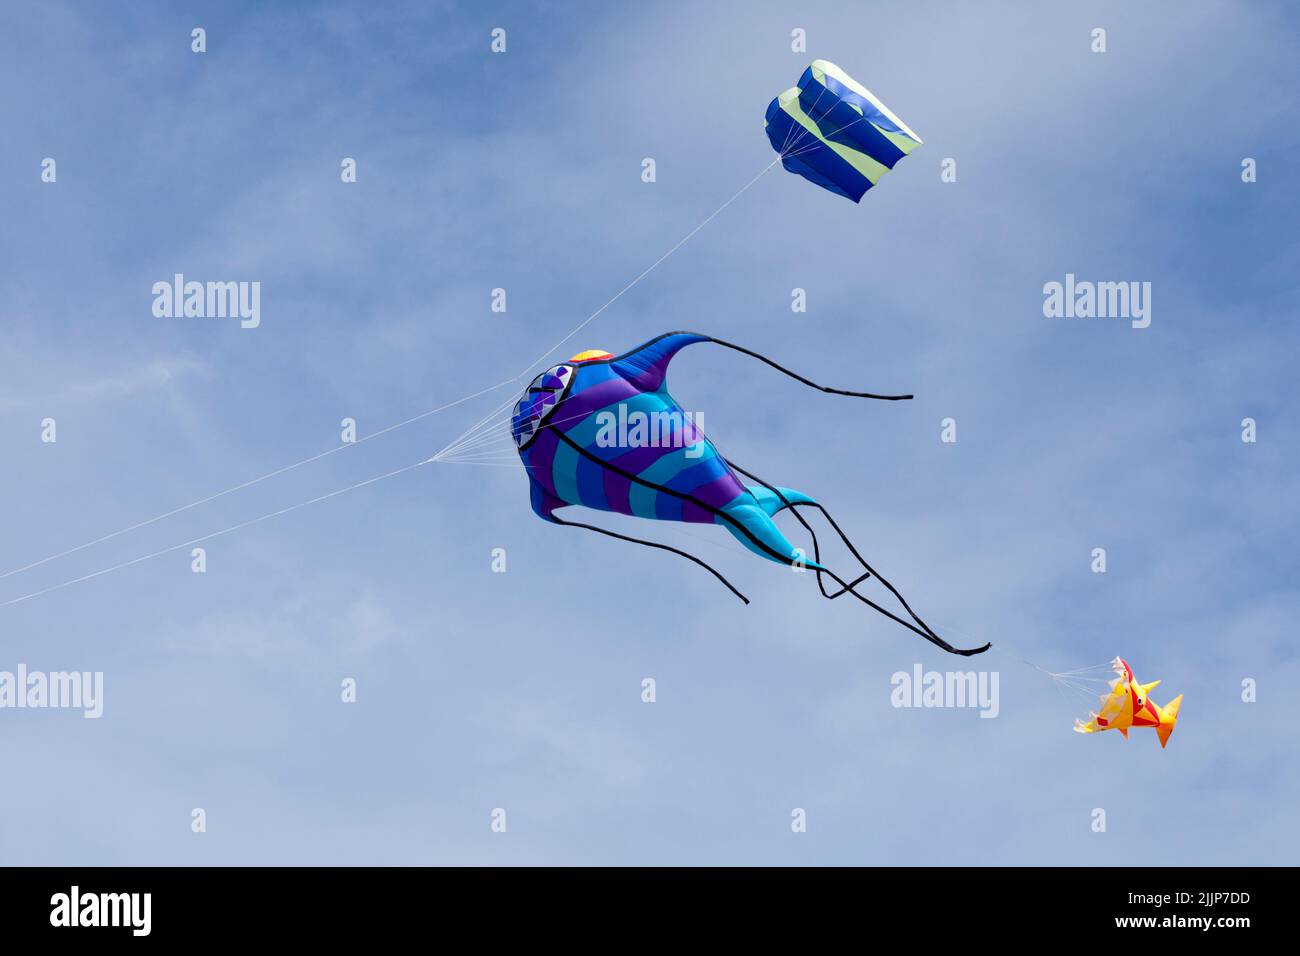 Fish-like kite flying in mid-air during the wind and kite festival in Porspoder, Brittany. Stock Photo